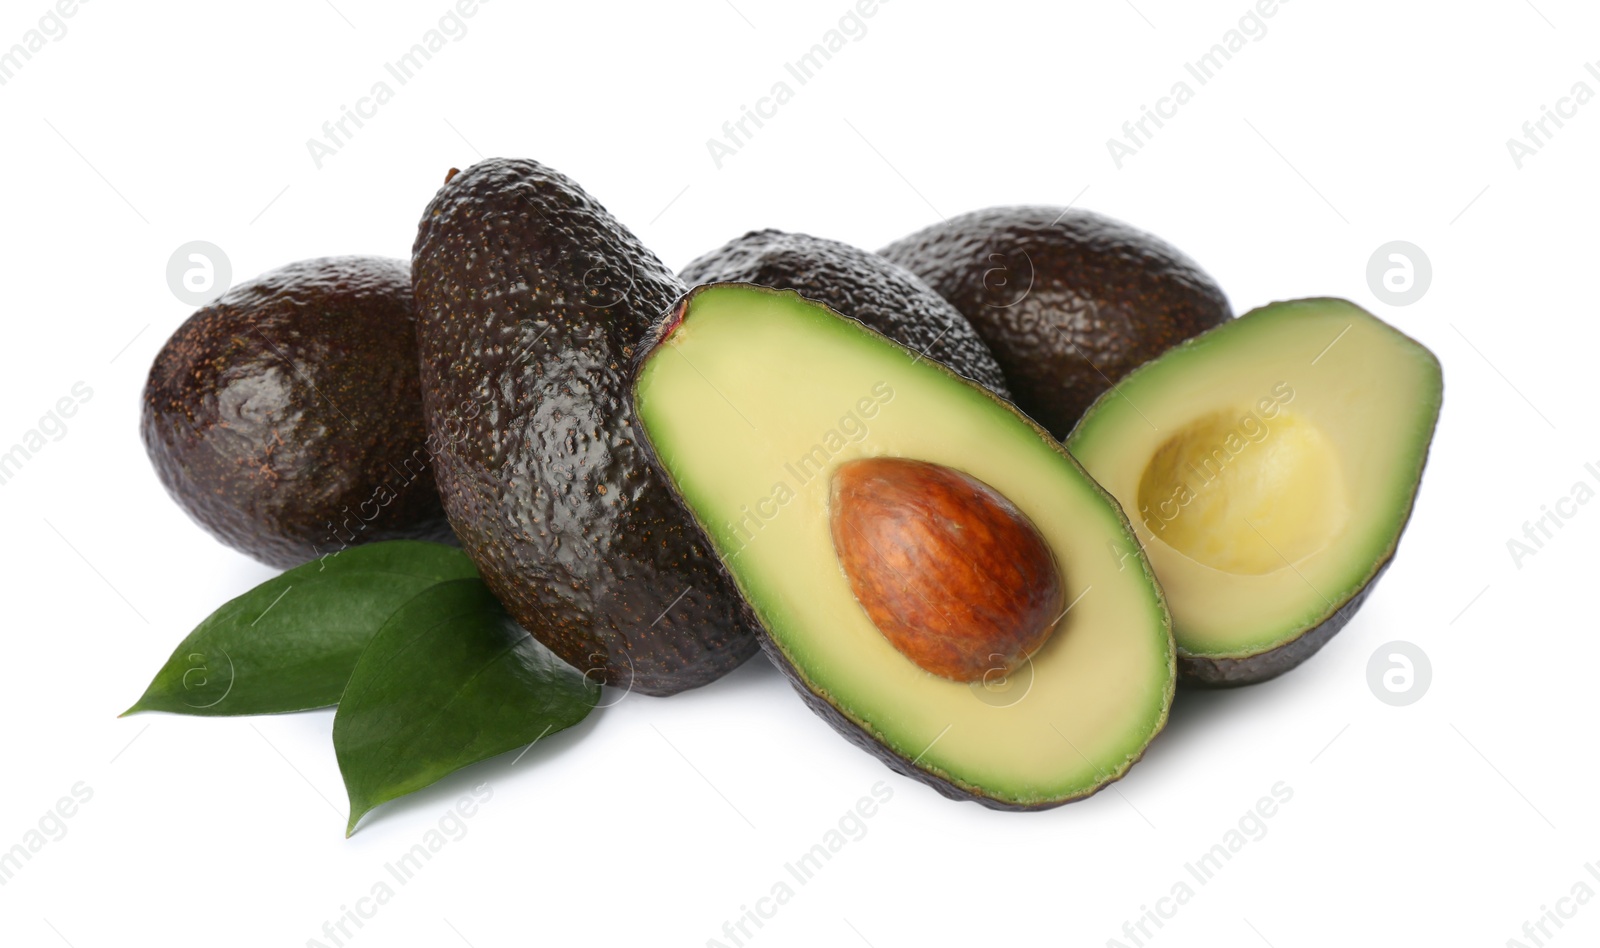 Photo of Cut and whole hass avocadoes with green leaves on white background